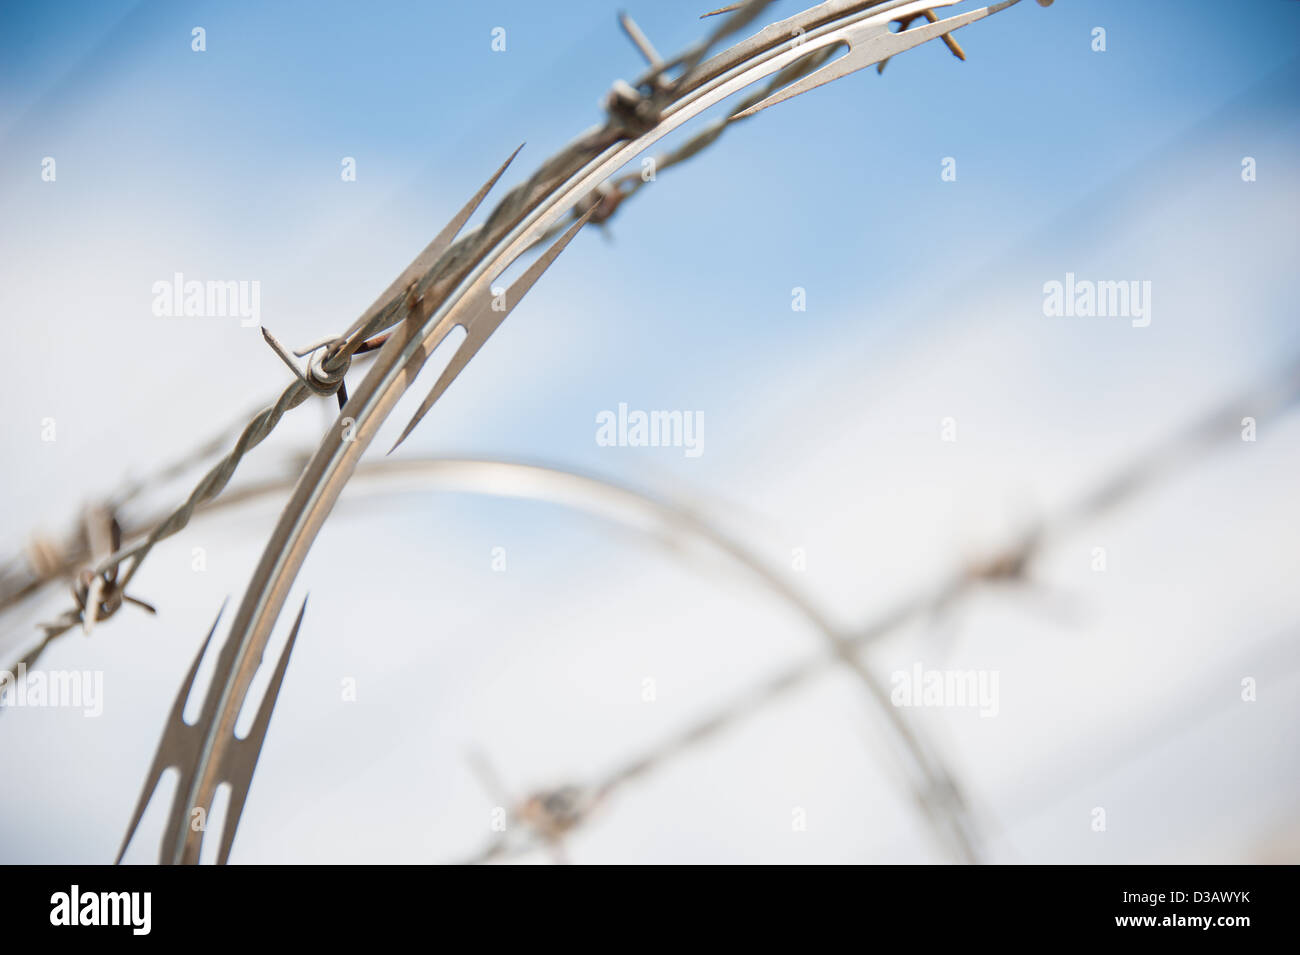 Coiled razor wire and barbed wire barrier against cloudy blue sky. Stock Photo